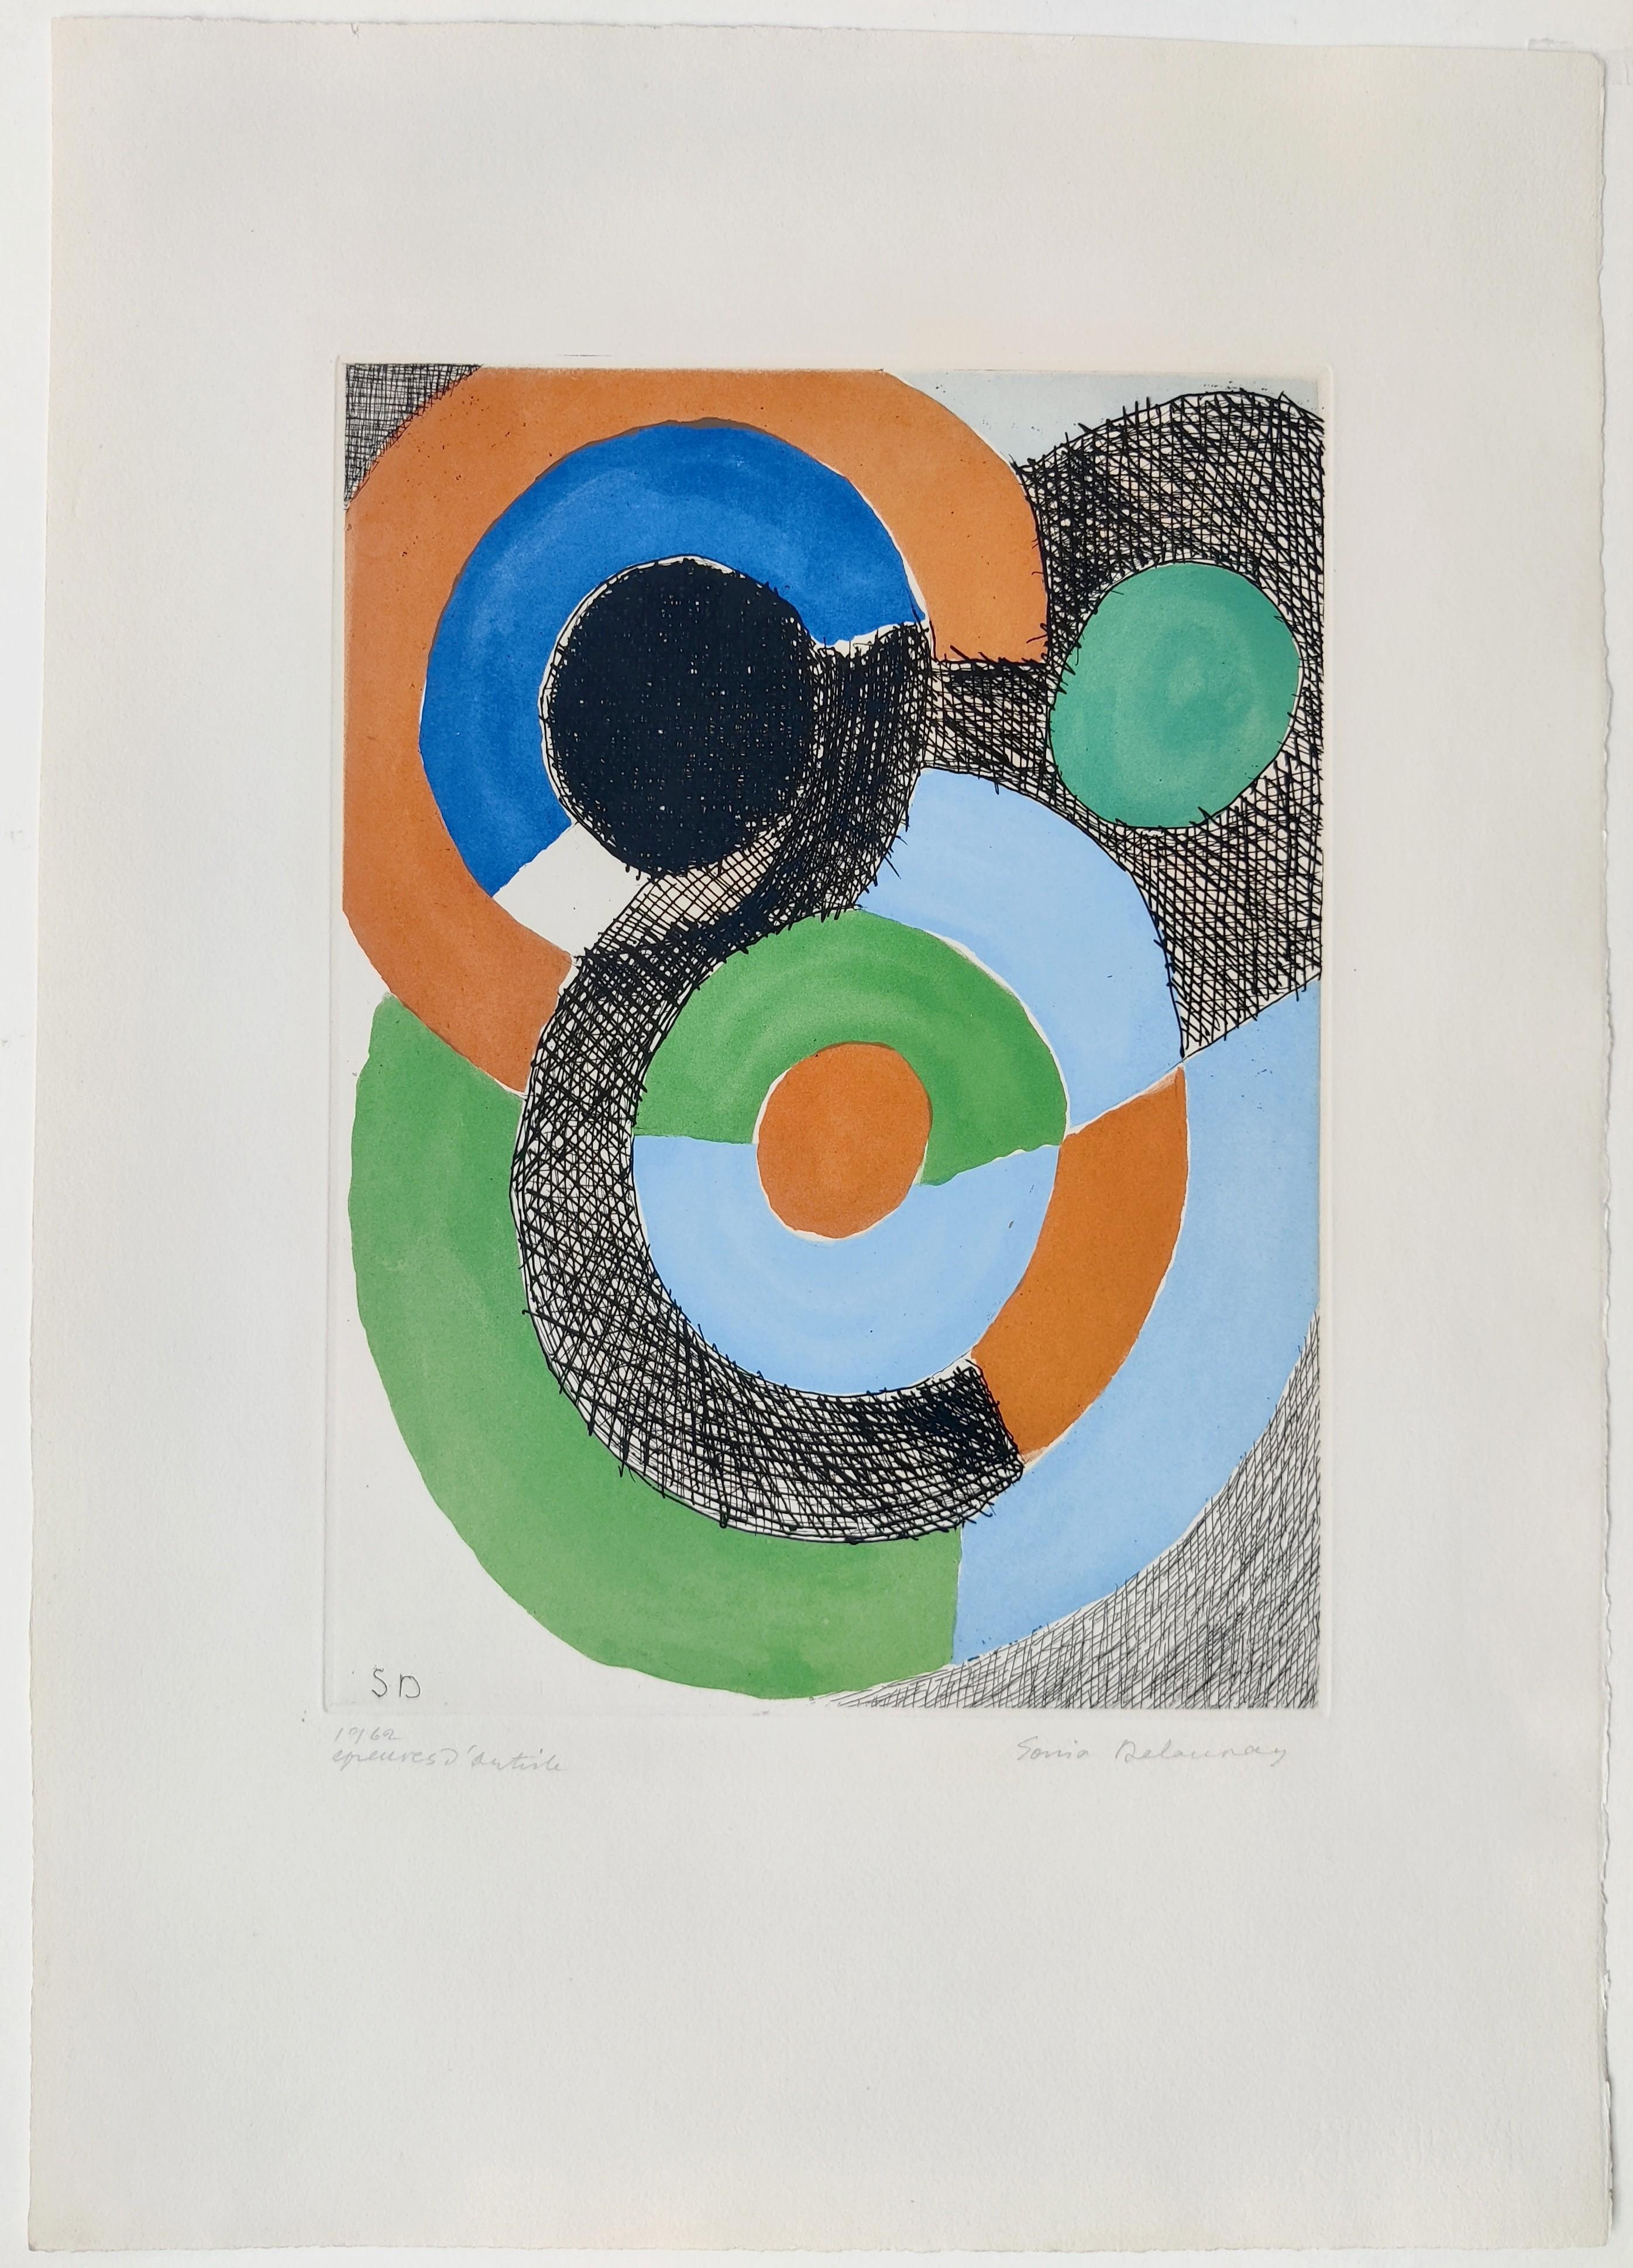 Rythmes et couleurs  - Print by Sonia Delaunay